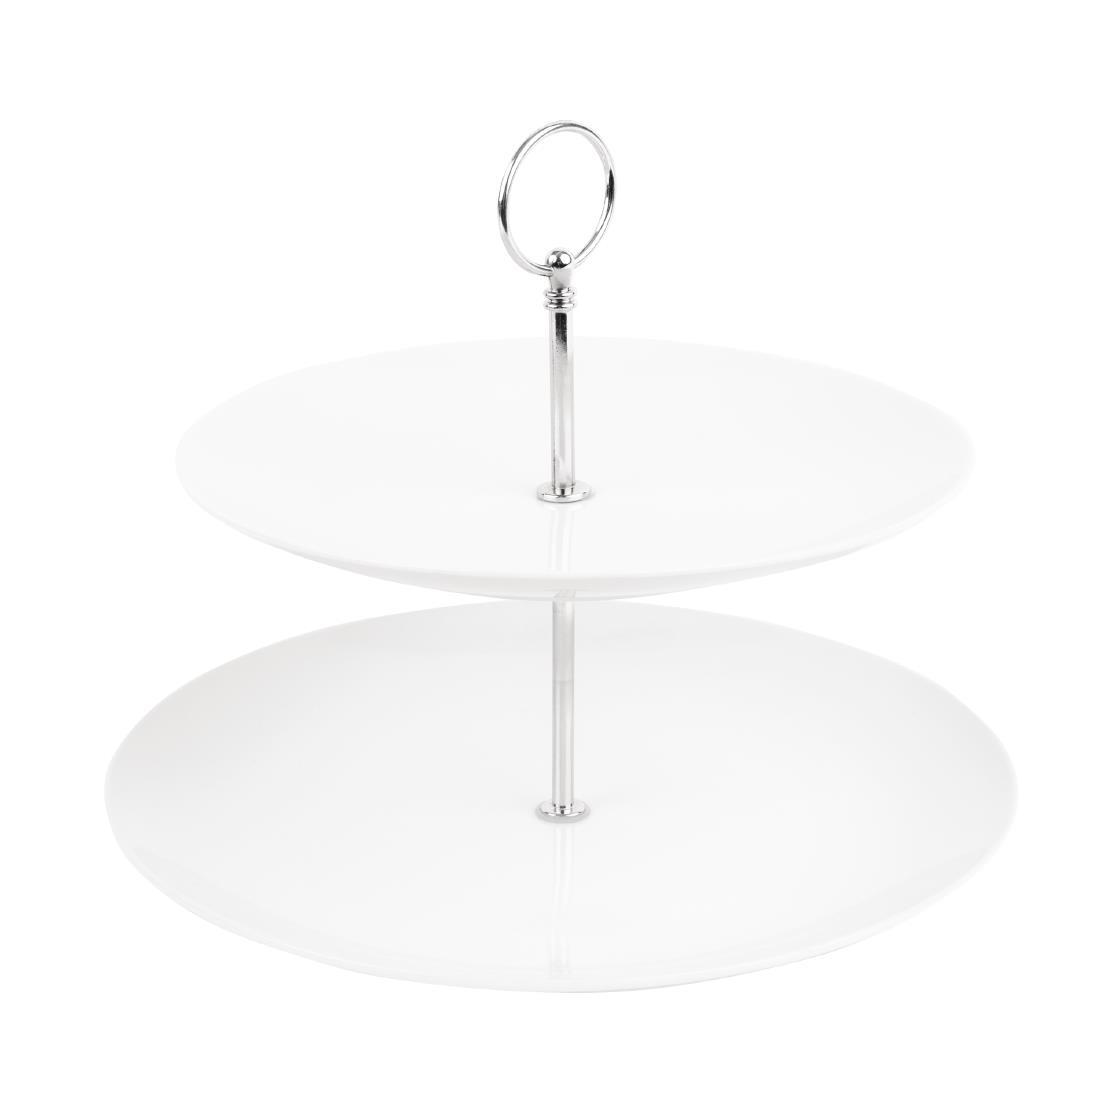 Olympia 2 Tier Afternoon Tea Cake Stand - GG880  - 1